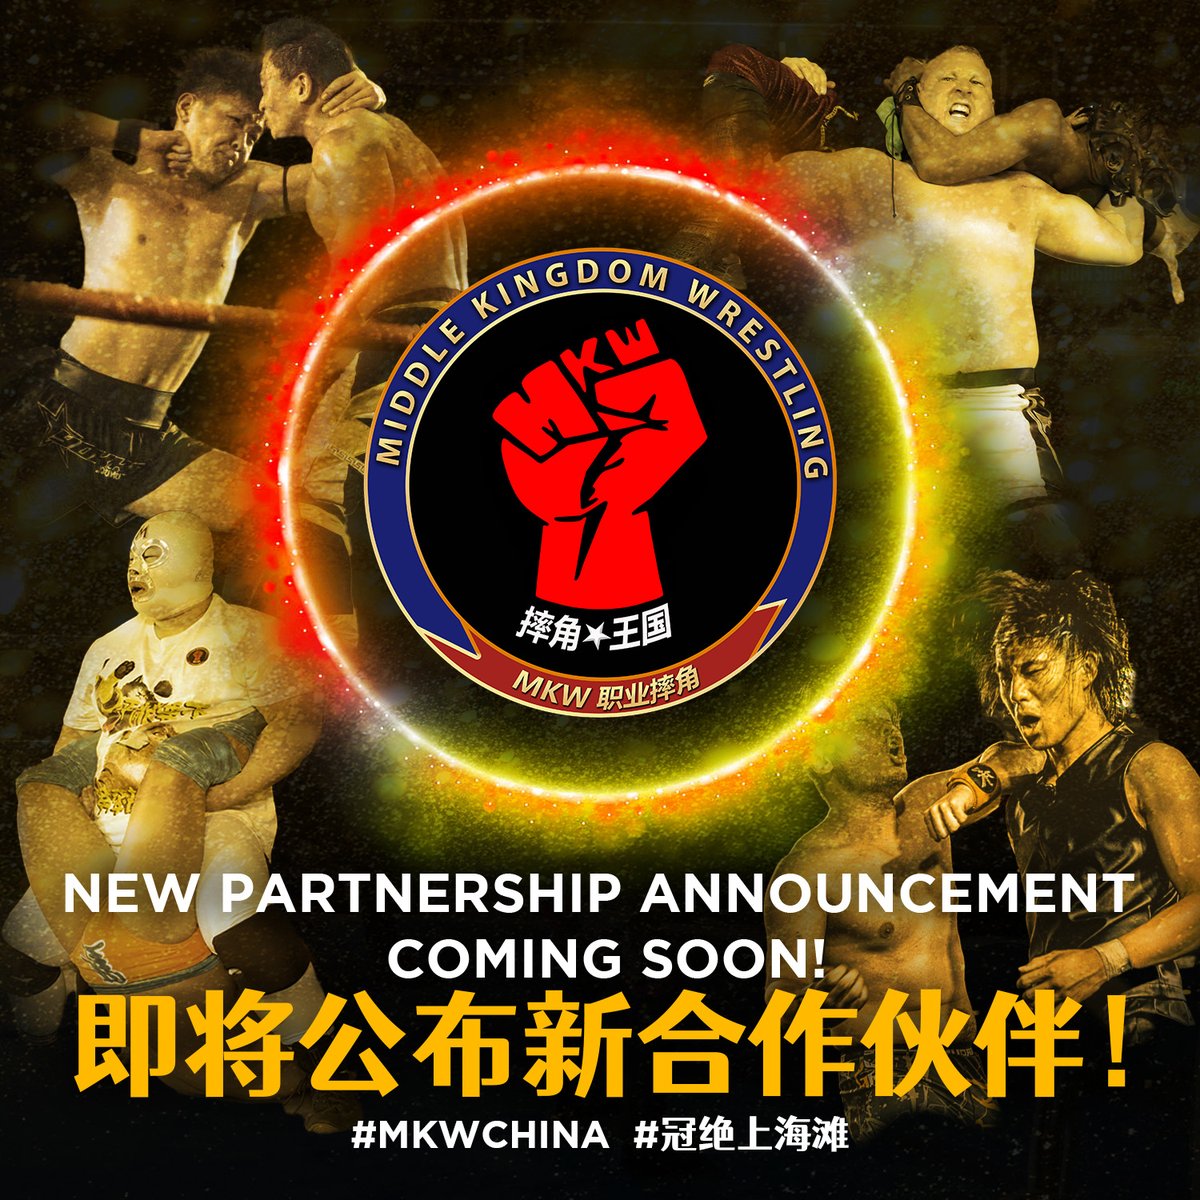 An exciting announcement coming soon! We're thrilled to reveal a strategic key partner for MKW's highly anticipated return to Shanghai later this year. Keep your eyes and ears peeled for this groundbreaking news! 👀👂 #MKWChina #MiddleKingdomWrestling #MKWShanghai